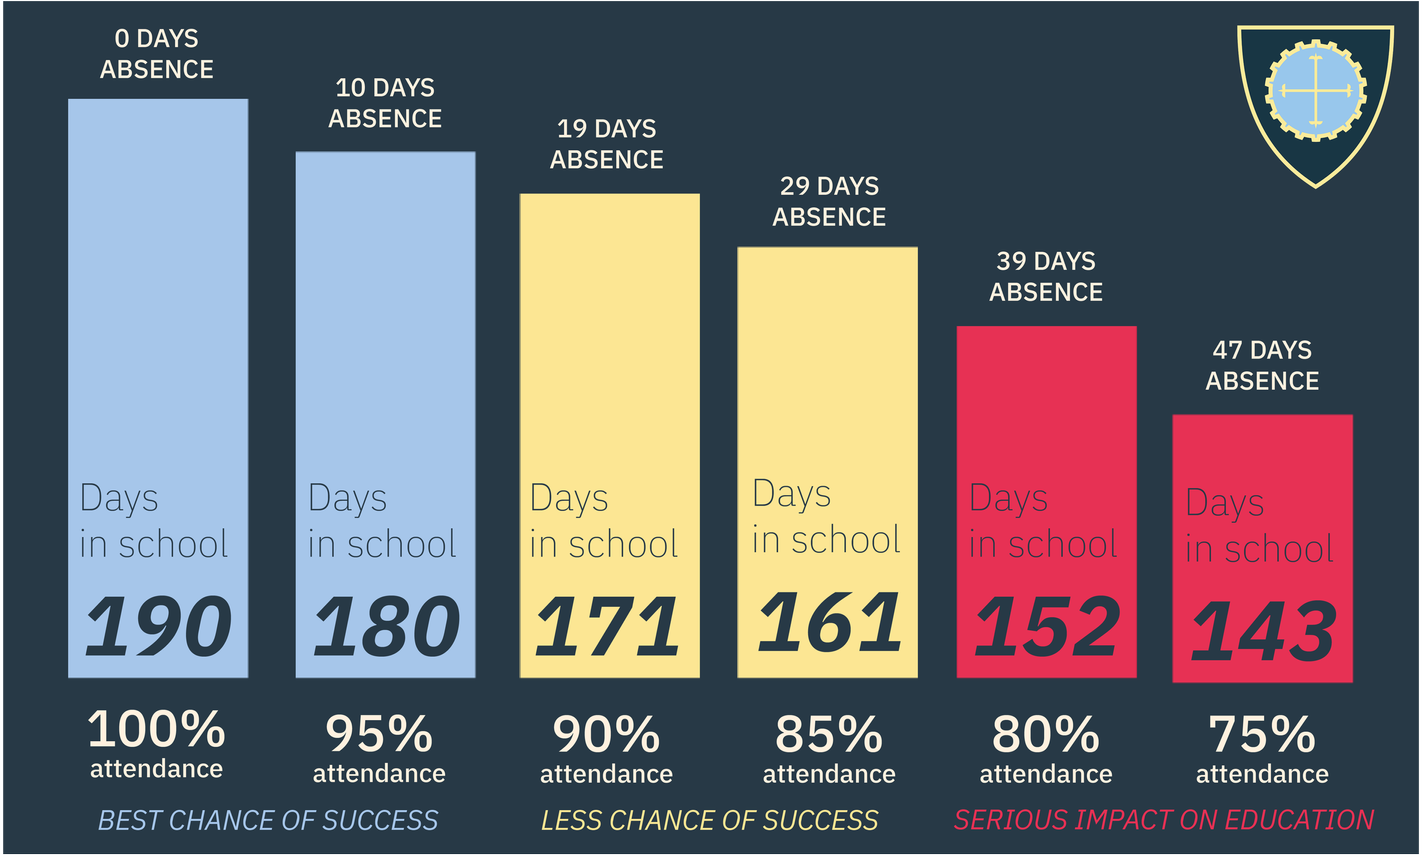 Graph showing the link between days absence and percentage attendance